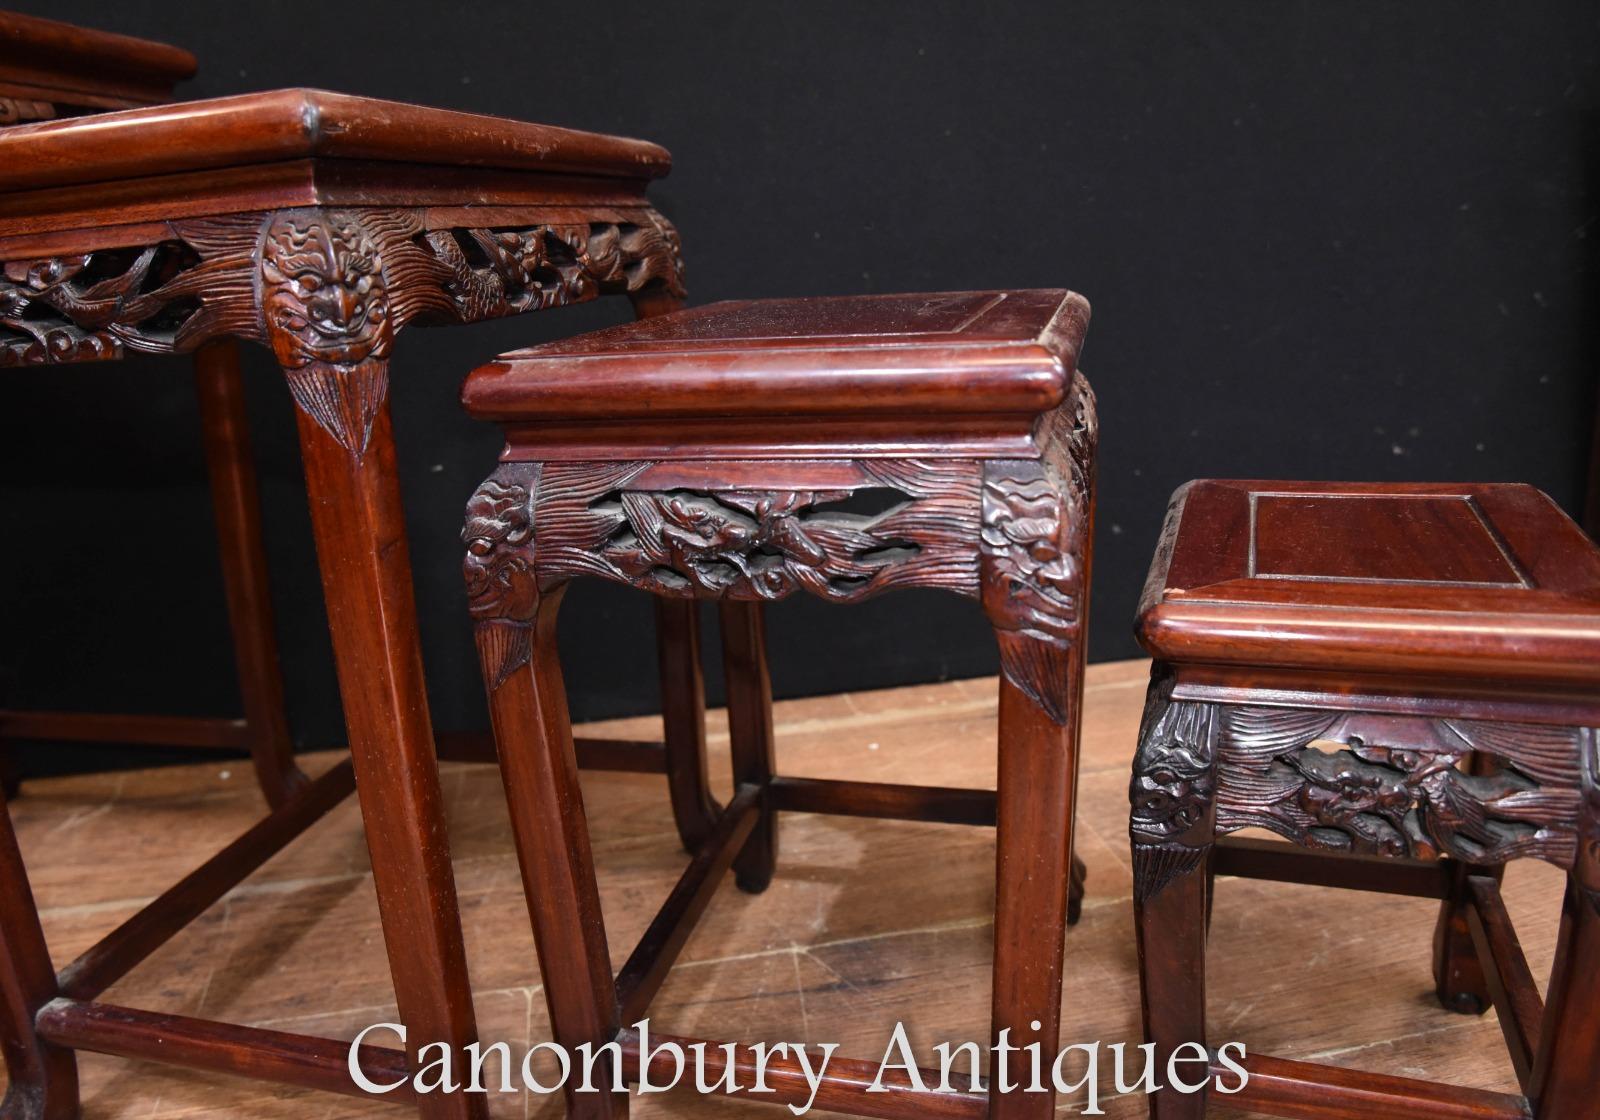 - Gorgeous set of four antique Chinese nest of tables in hardwood
- Viewings available by appointment
- Offered in great shape ready for home use right away
- We ship to every corner of the planet.